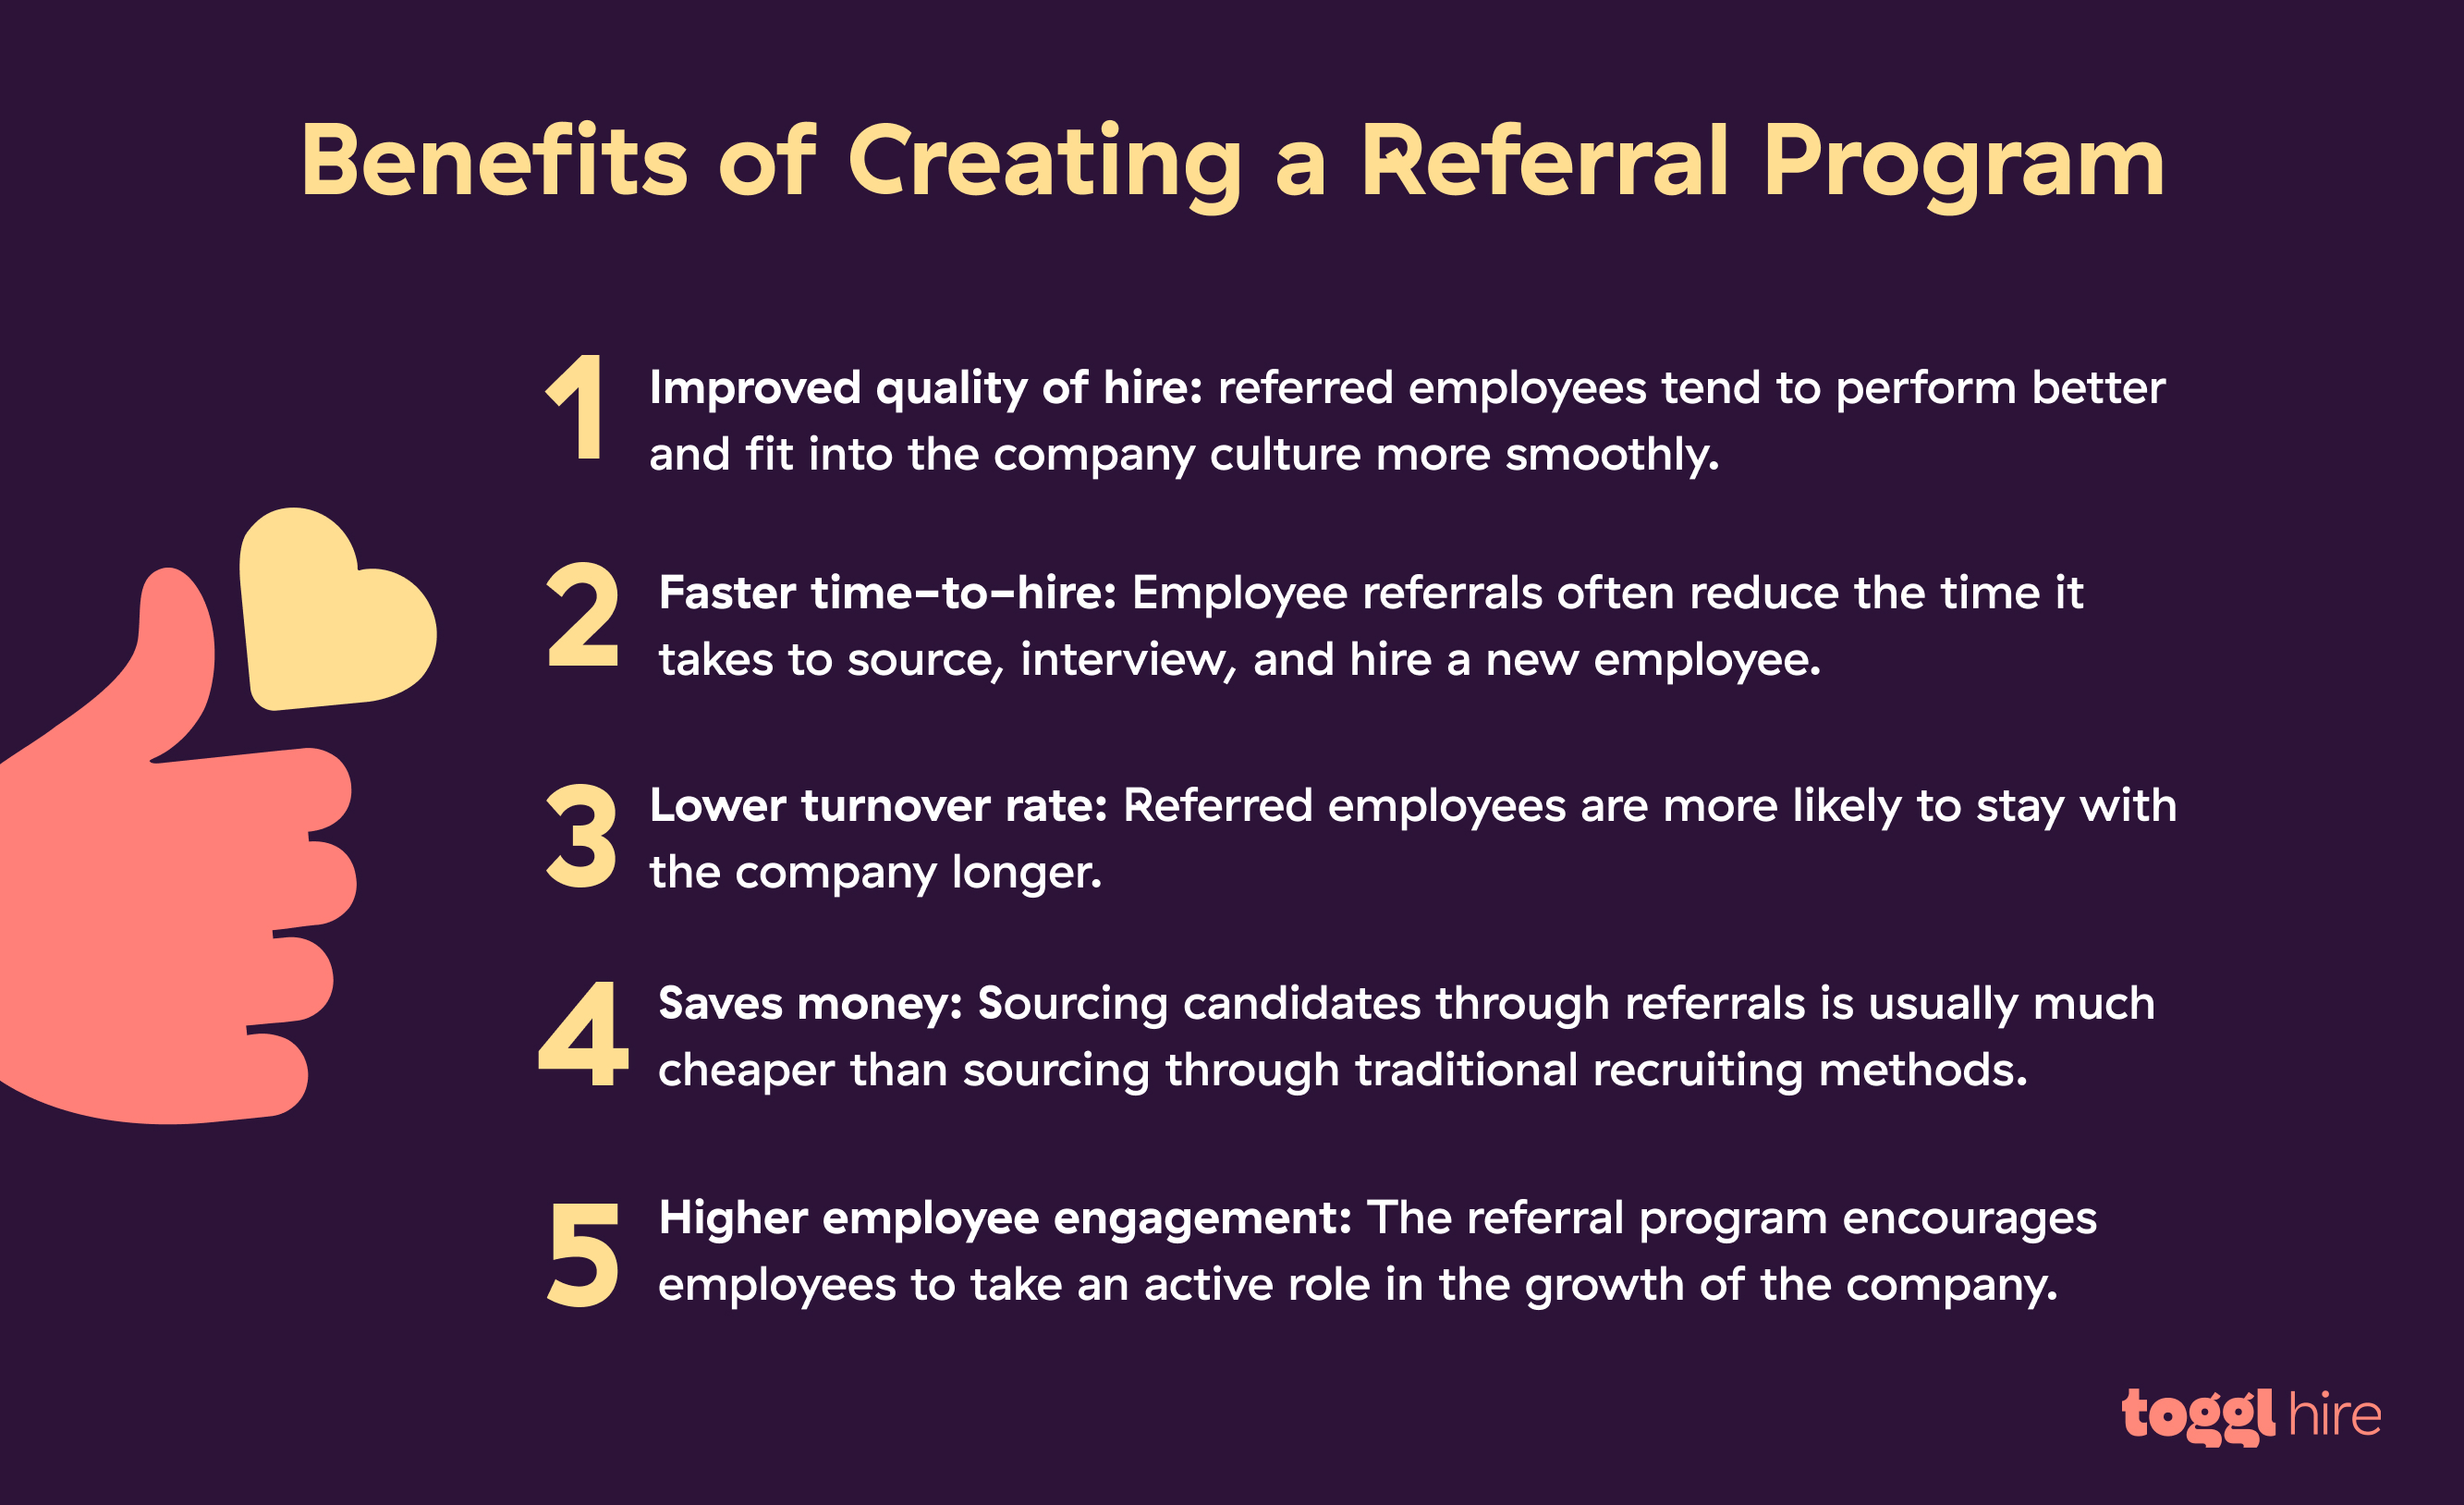 Employee referral programs can help hiring managers fill open positions faster and at a reduced cost. 